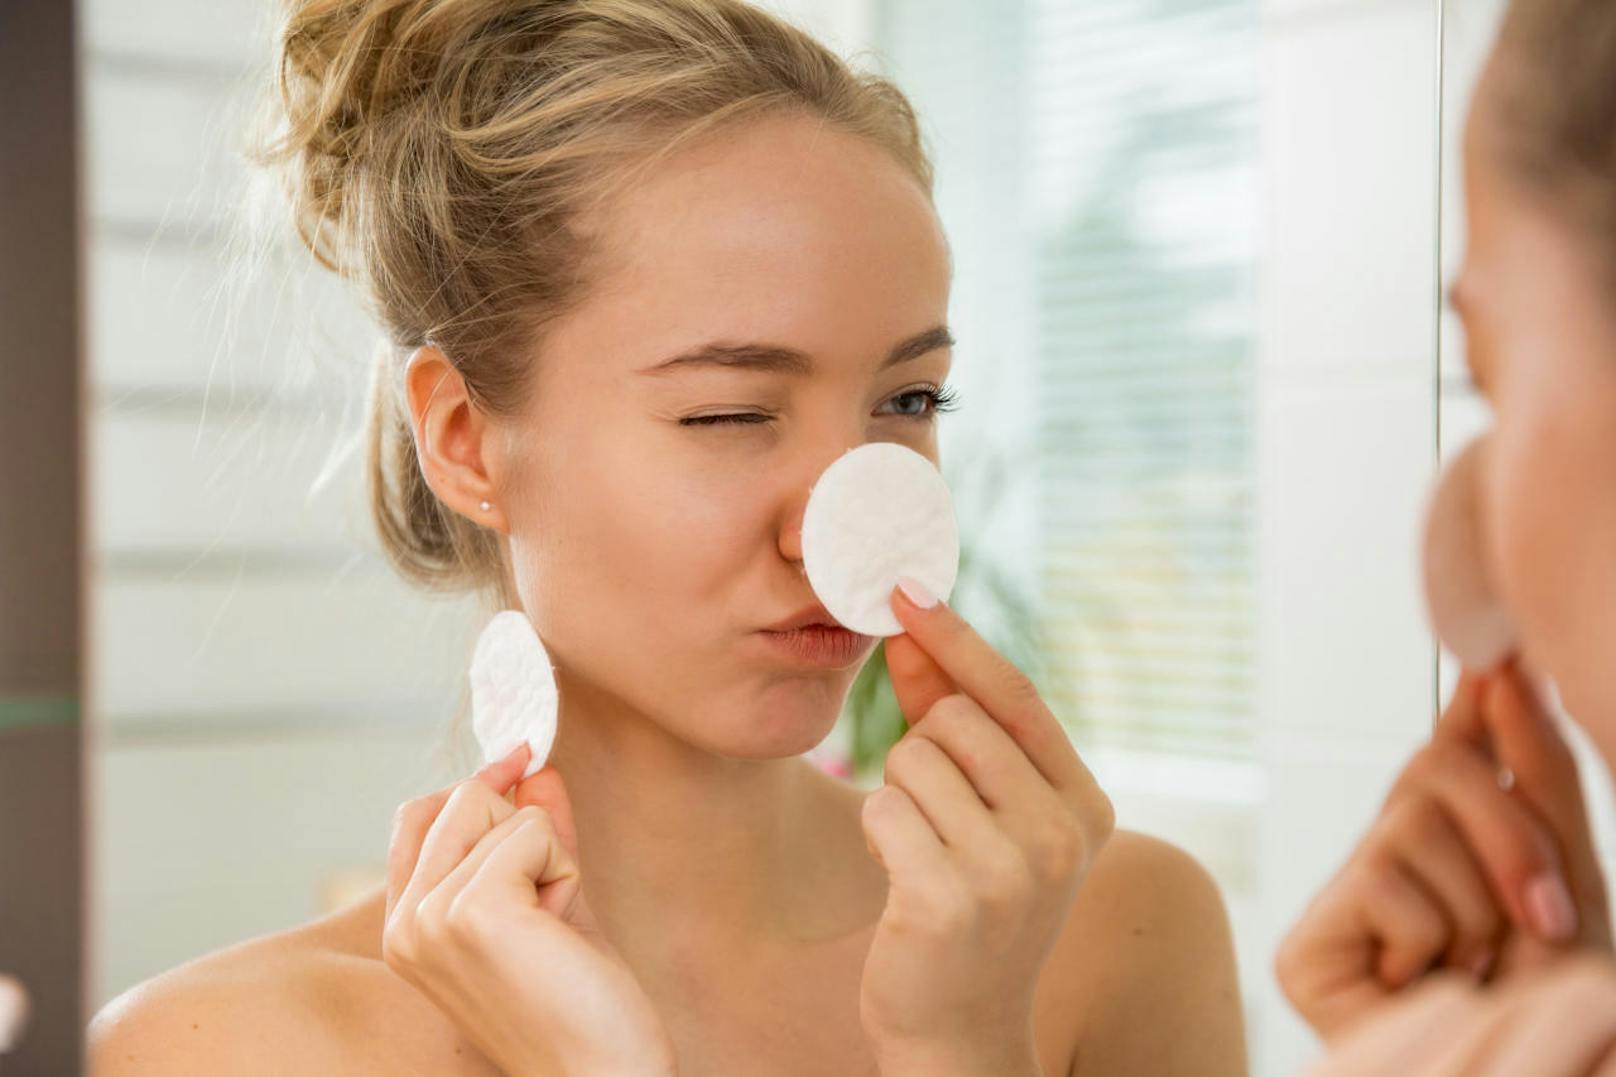 Young beautiful woman cleaning her face skin with cotton pad in bathroom. Standing in towel, looking in the mirror, laughing and having fun. Morning skincare routine.